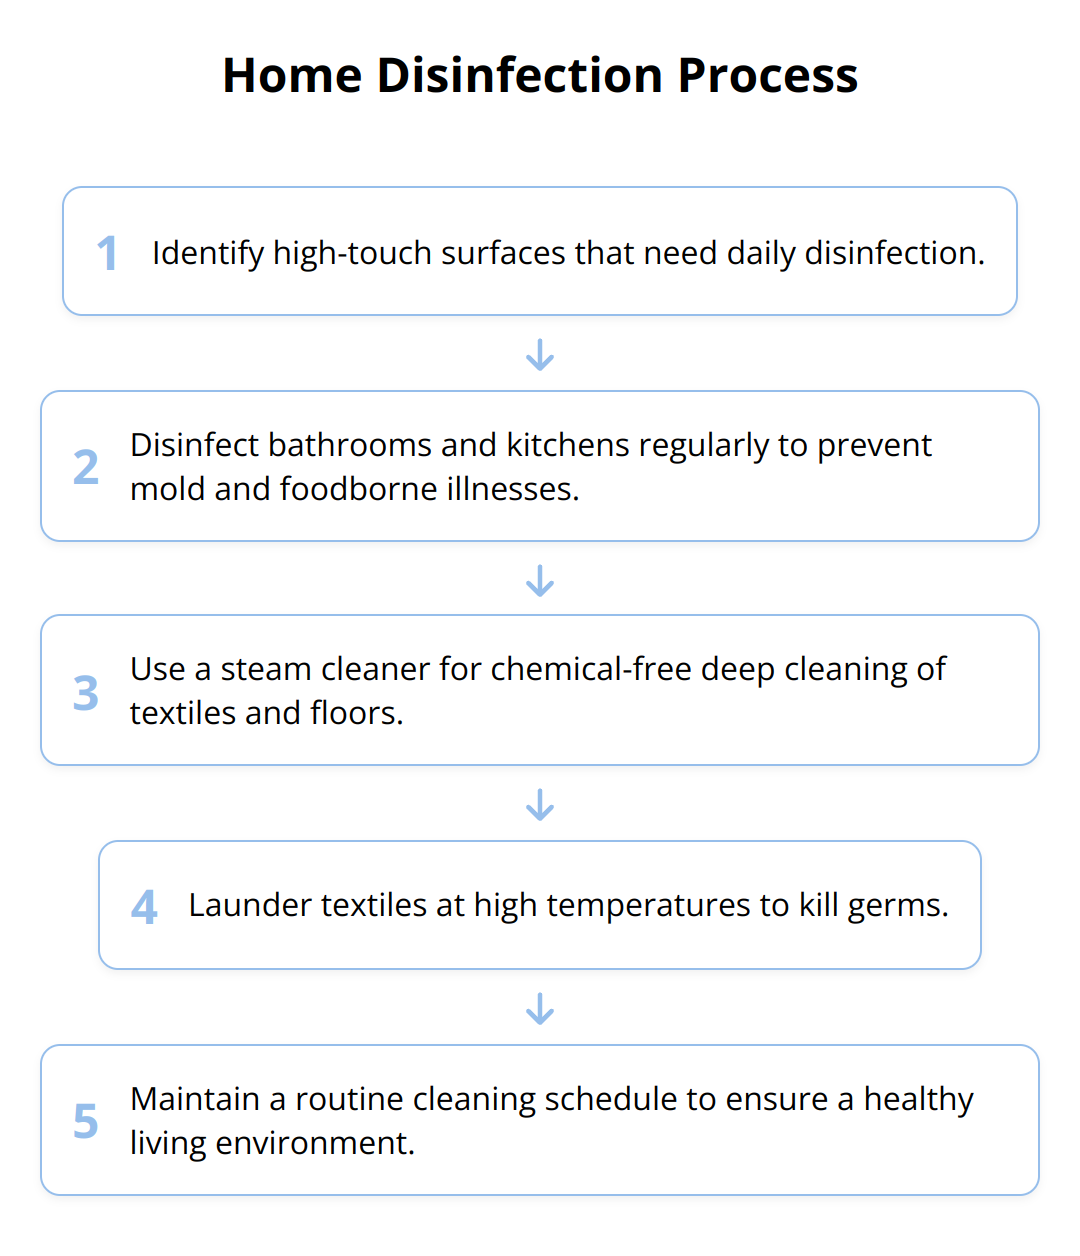 Flow Chart - Home Disinfection Process